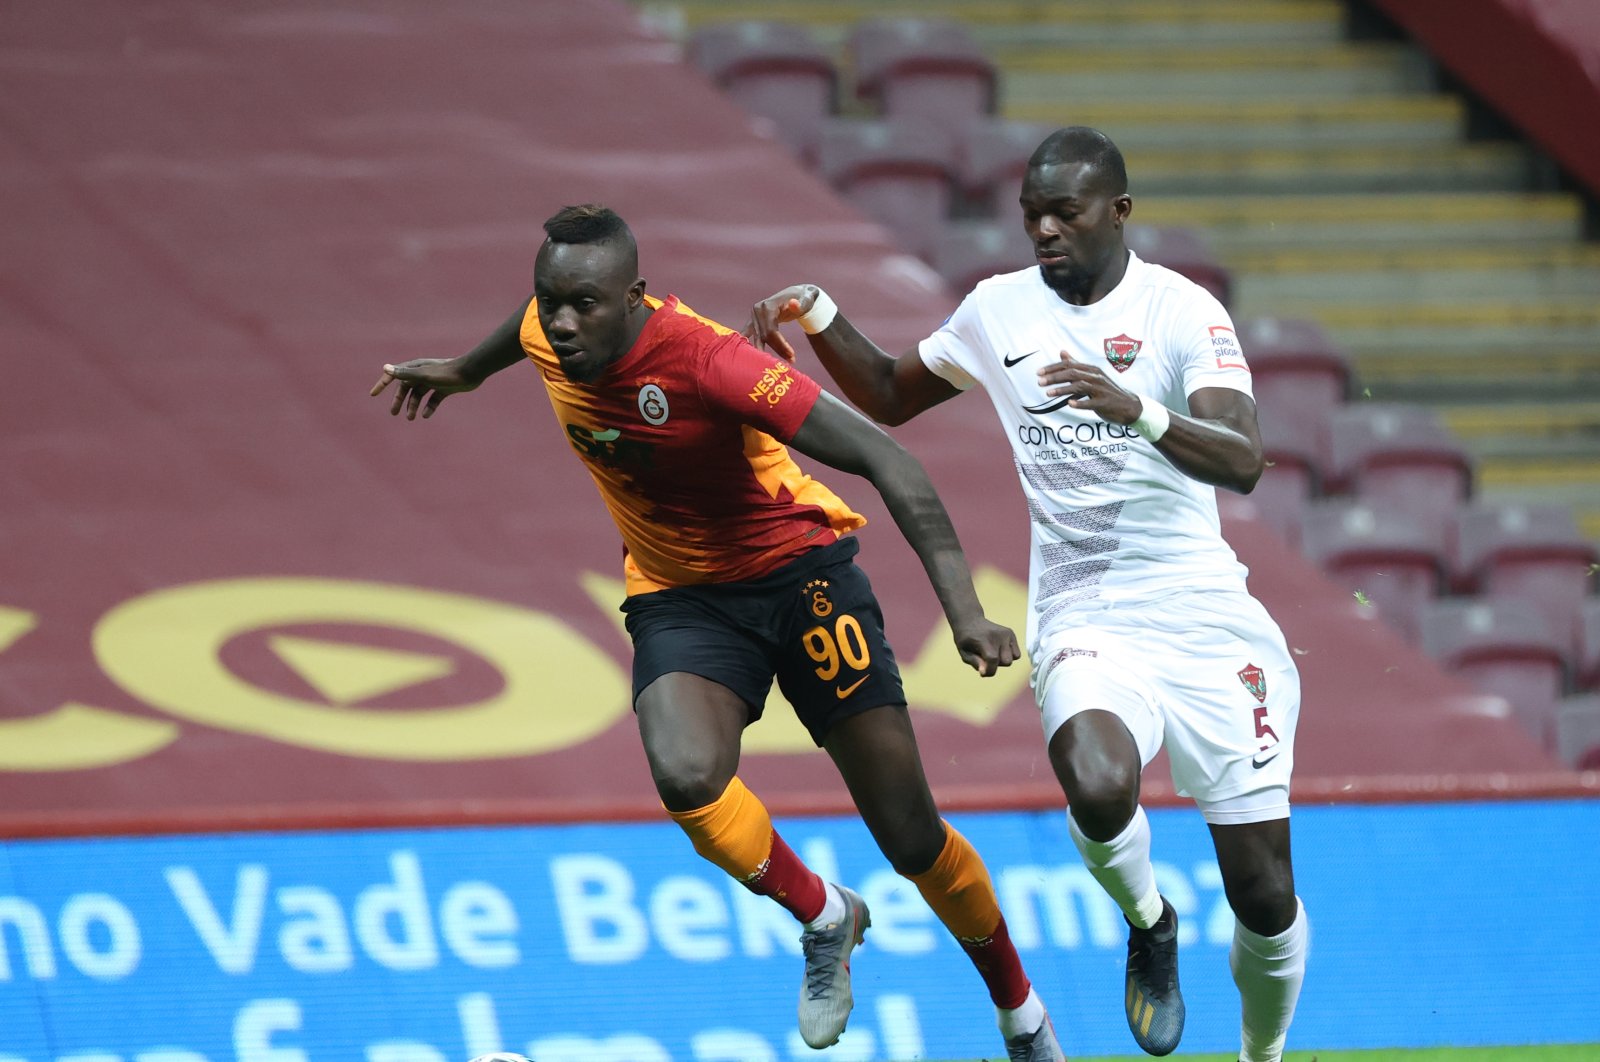 Mbaye Diagne (L) in action against Hatayspor's Isaac Sackey, in Istanbul, Turkey, Dec. 5, 2020. (AA PHOTO) 